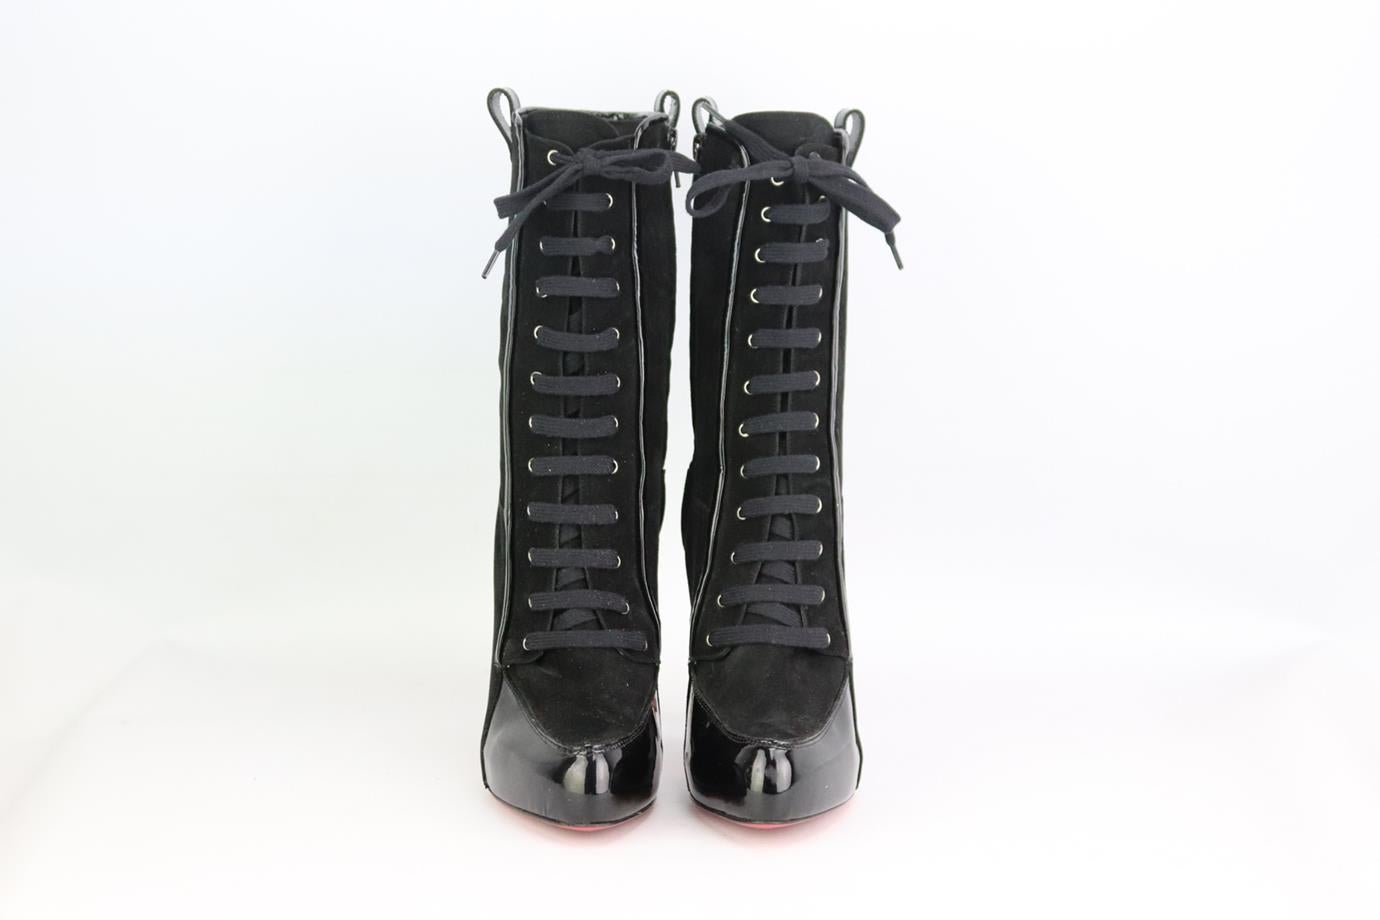 Christian Louboutin patent leather and suede platform boots. Made from black suede and patent leather with sexy lace-up fastening and striking heel with the brand’s iconic red sole. Black. Lace up fastening at front. Does not come with box or